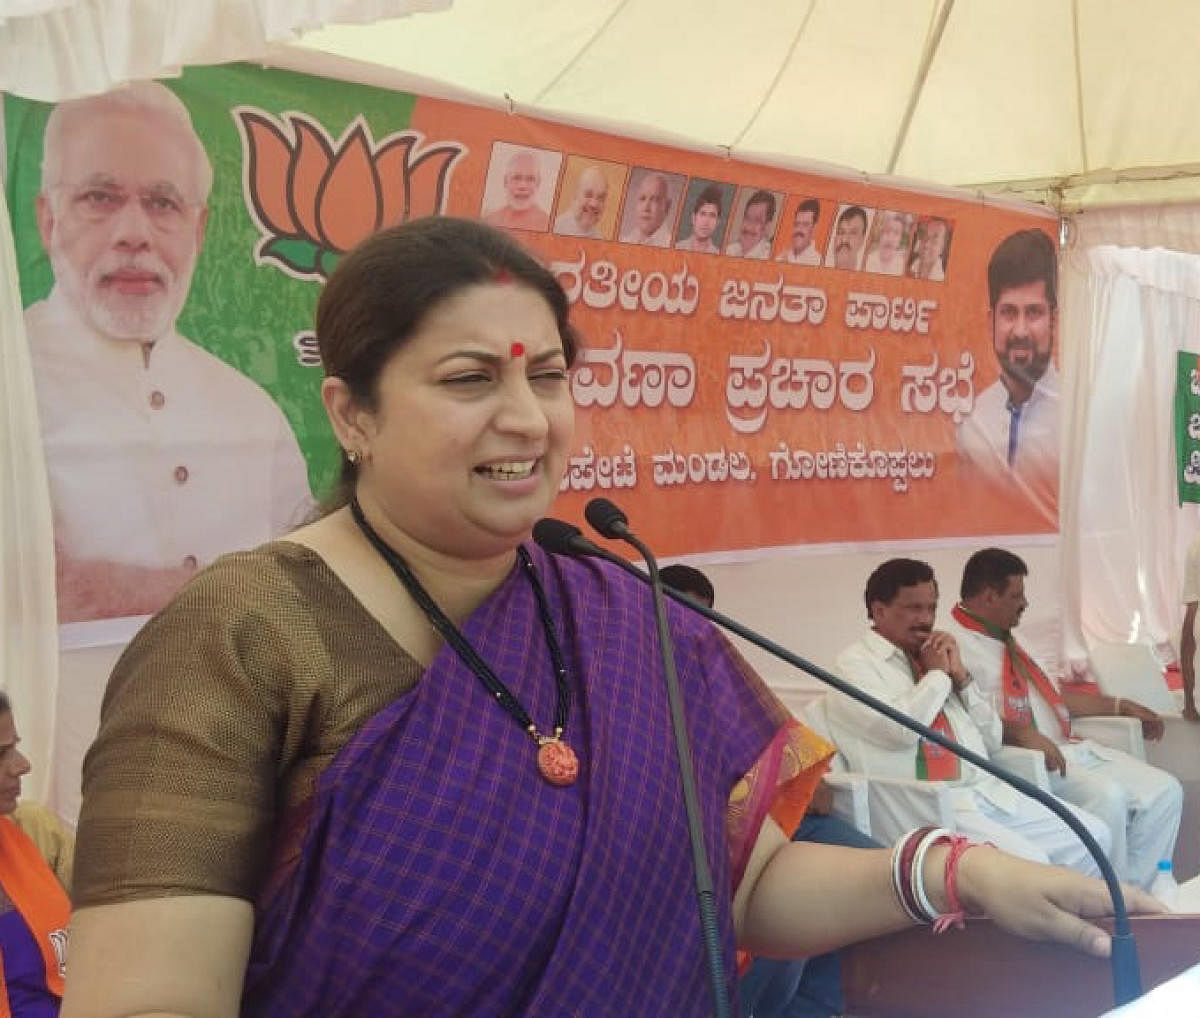 Coalition govt protecting looters in state: Smriti